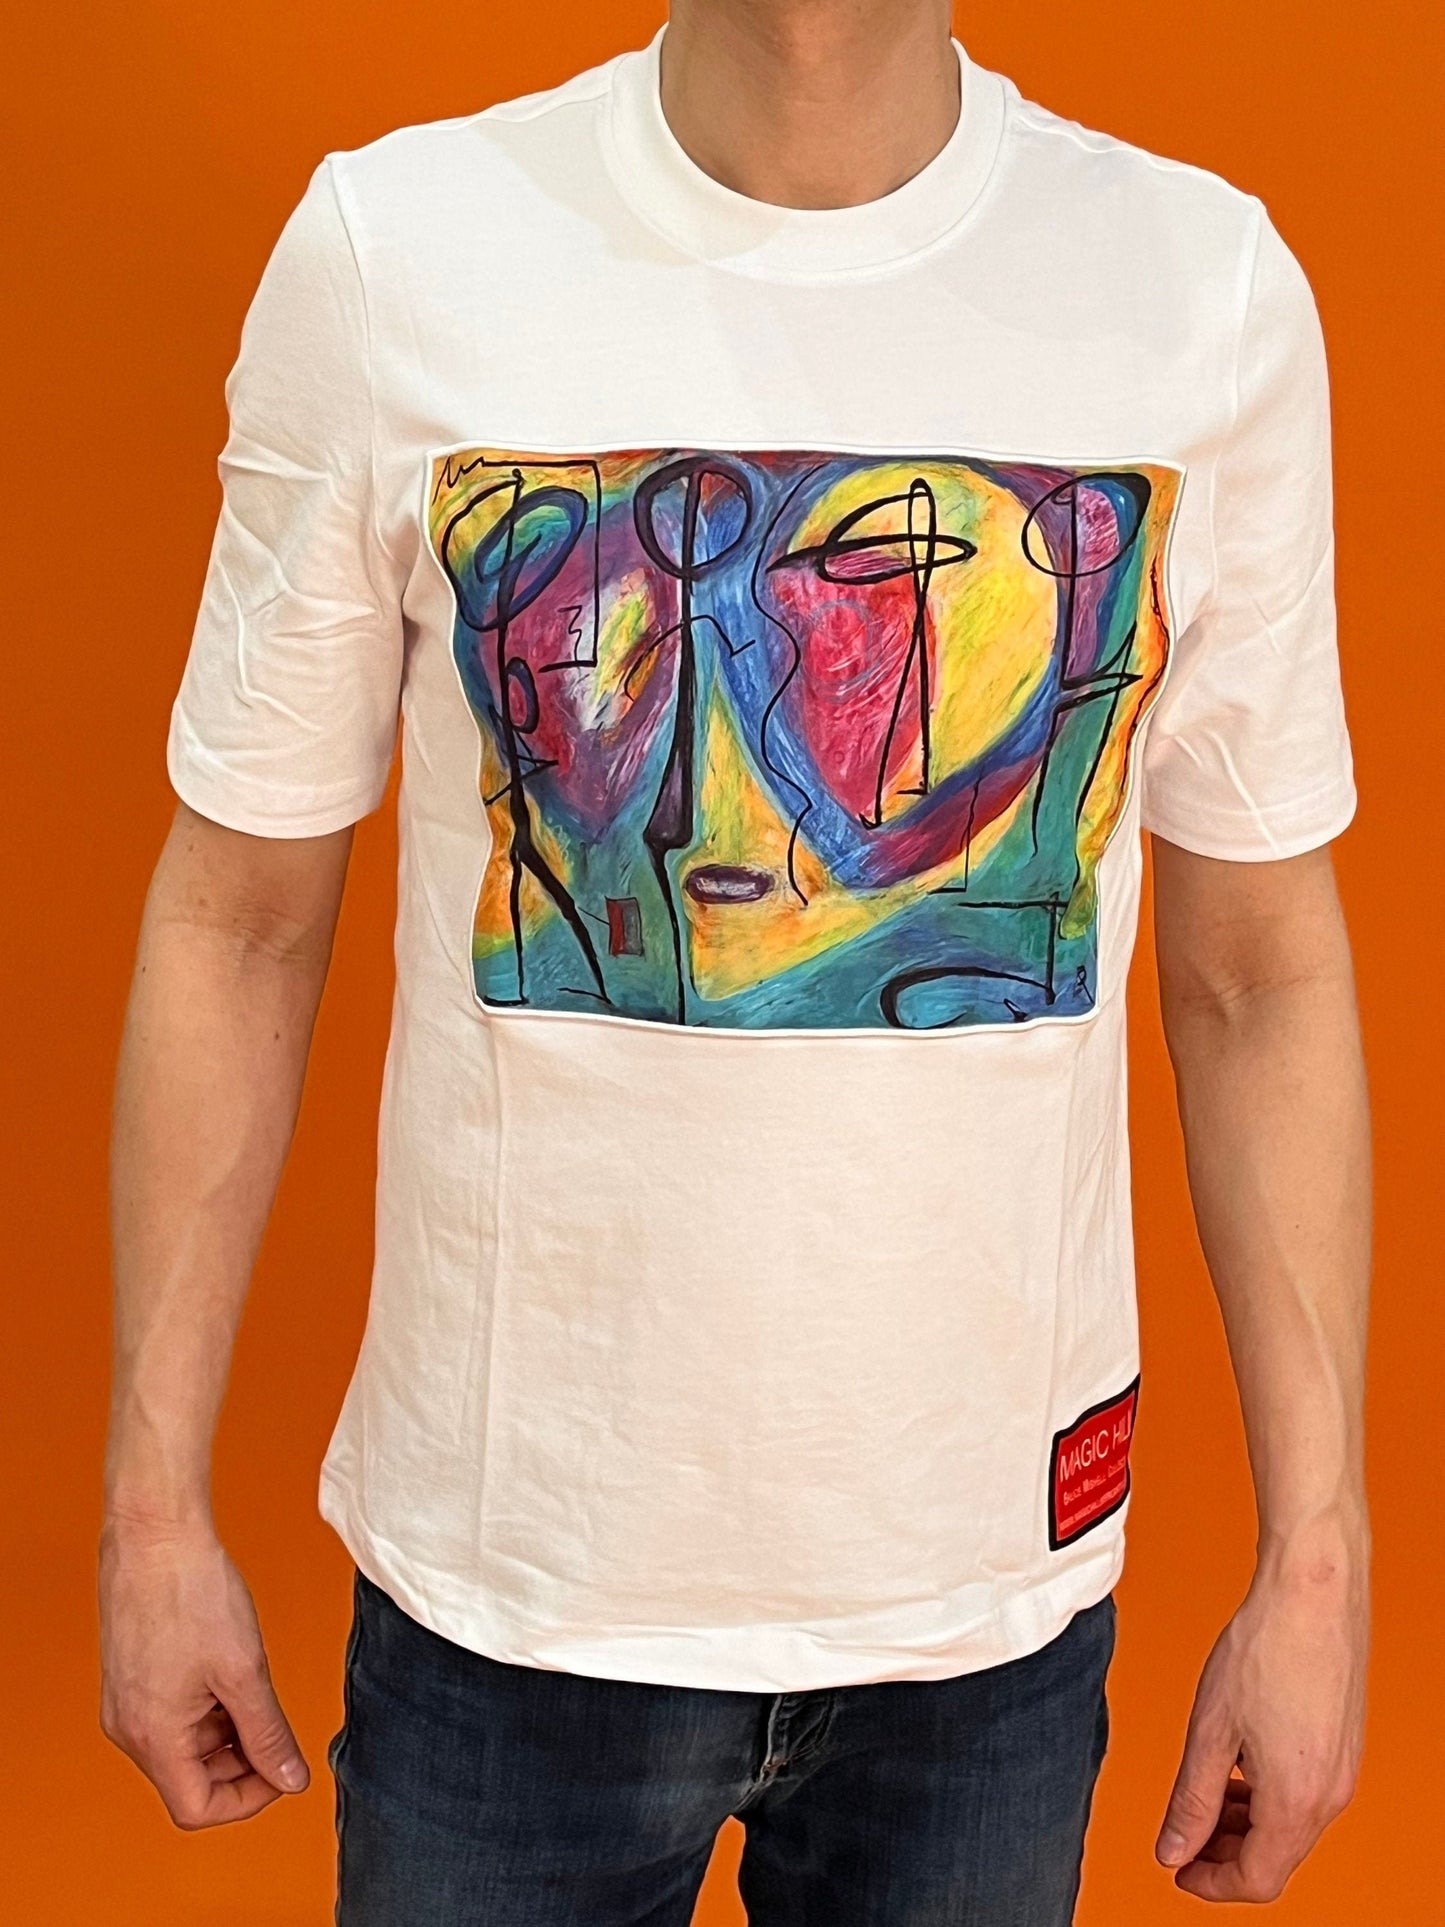 Magic Hill exclusive design with “Bruce Mishell” artwork printed on a Pima 100% cotton T-shirt